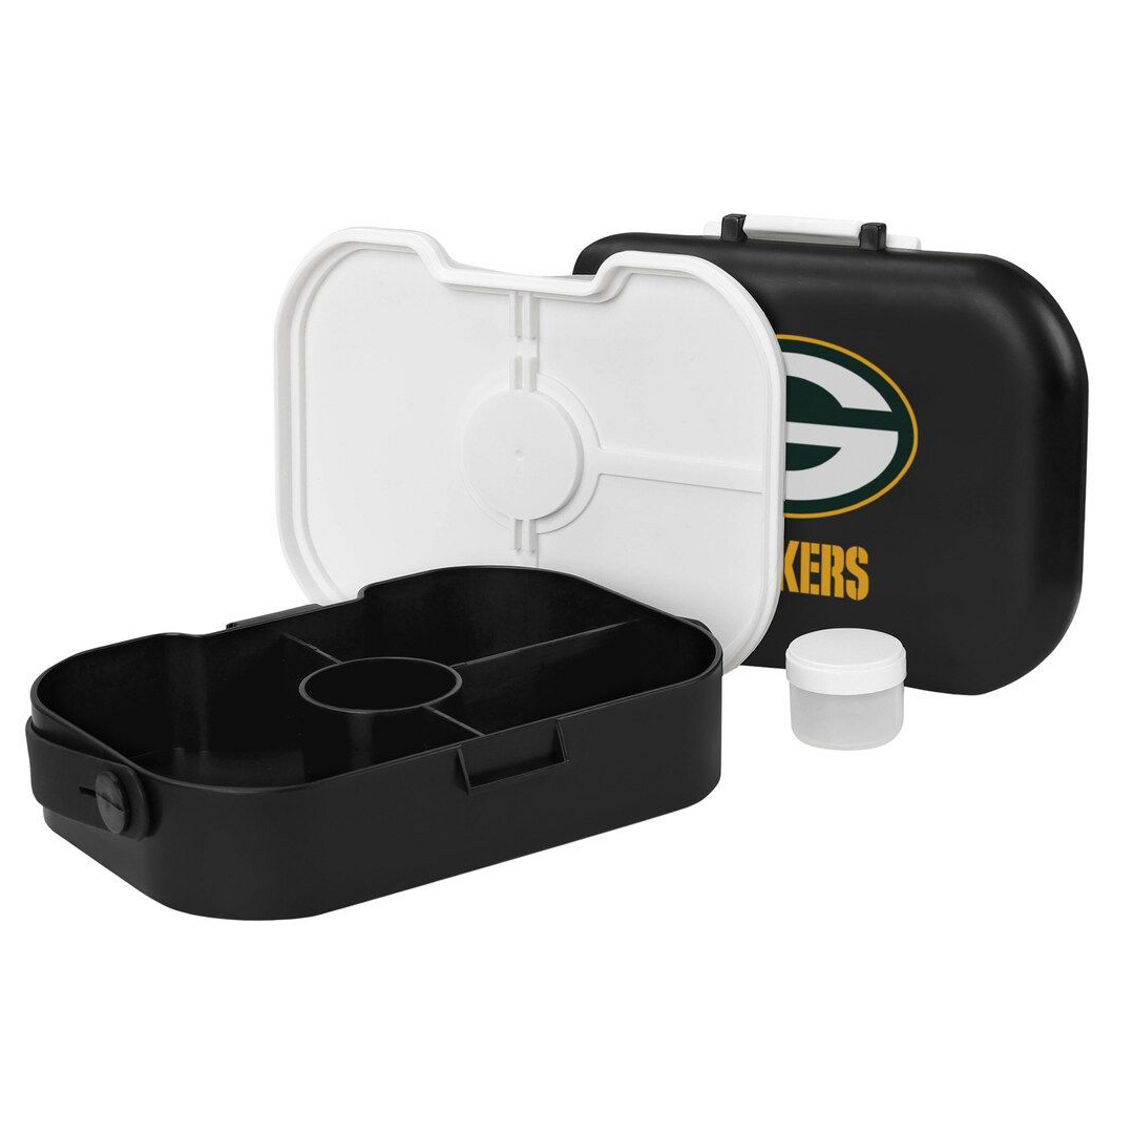 FOCO Green Bay Packers Hard Shell Compartment Lunch Box - Image 3 of 3